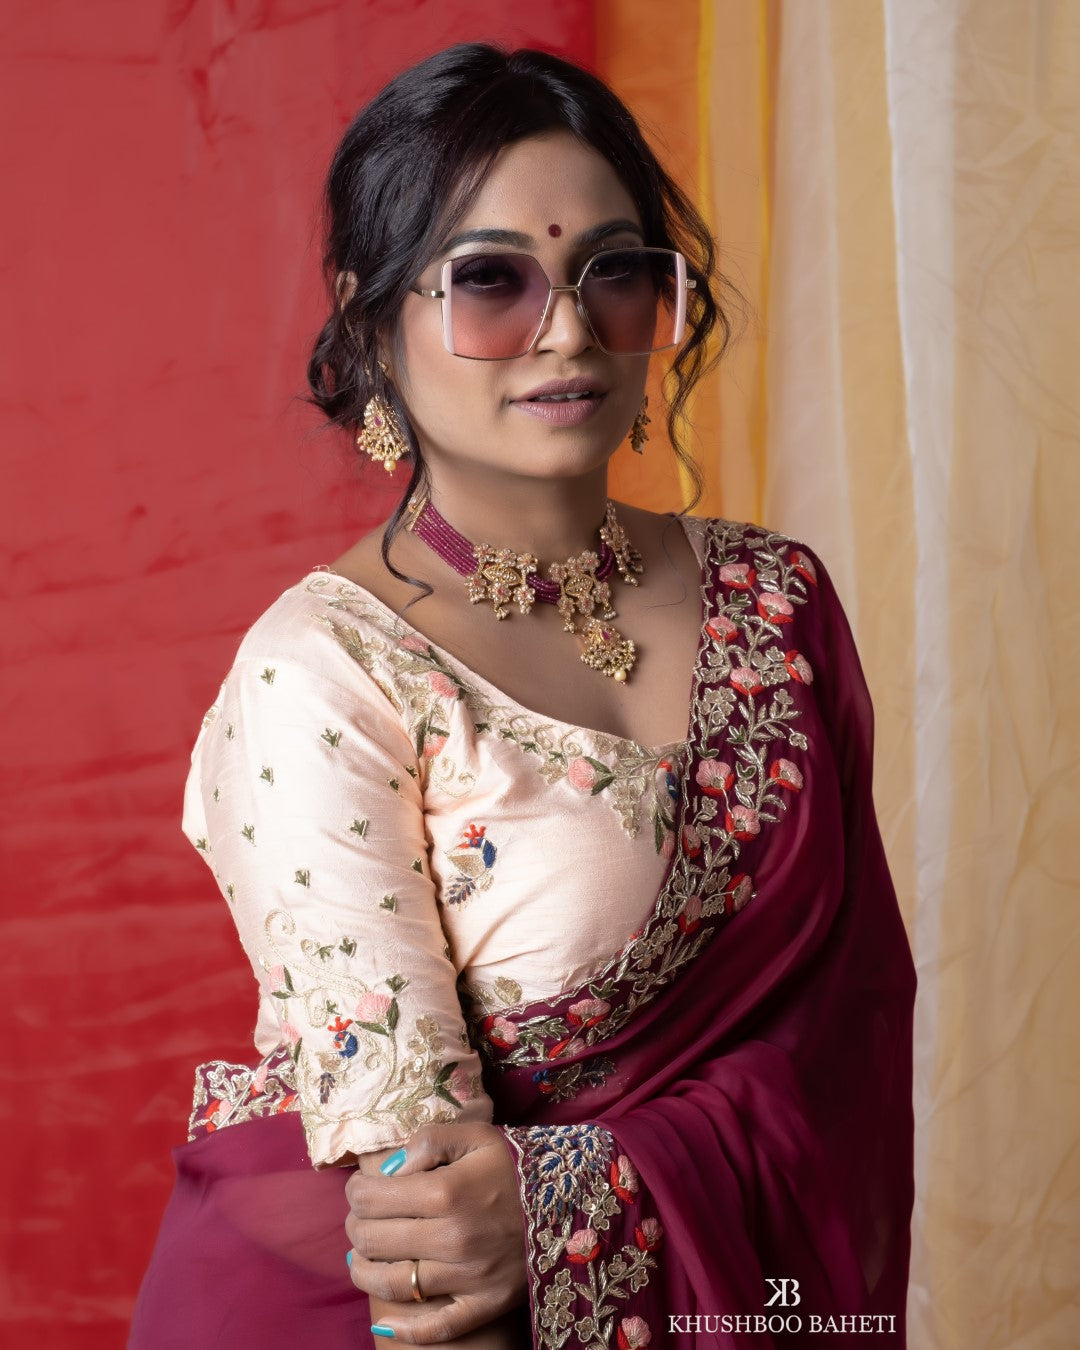 Wine Color Saree and Peach Blouse With Zardozi Embroidery